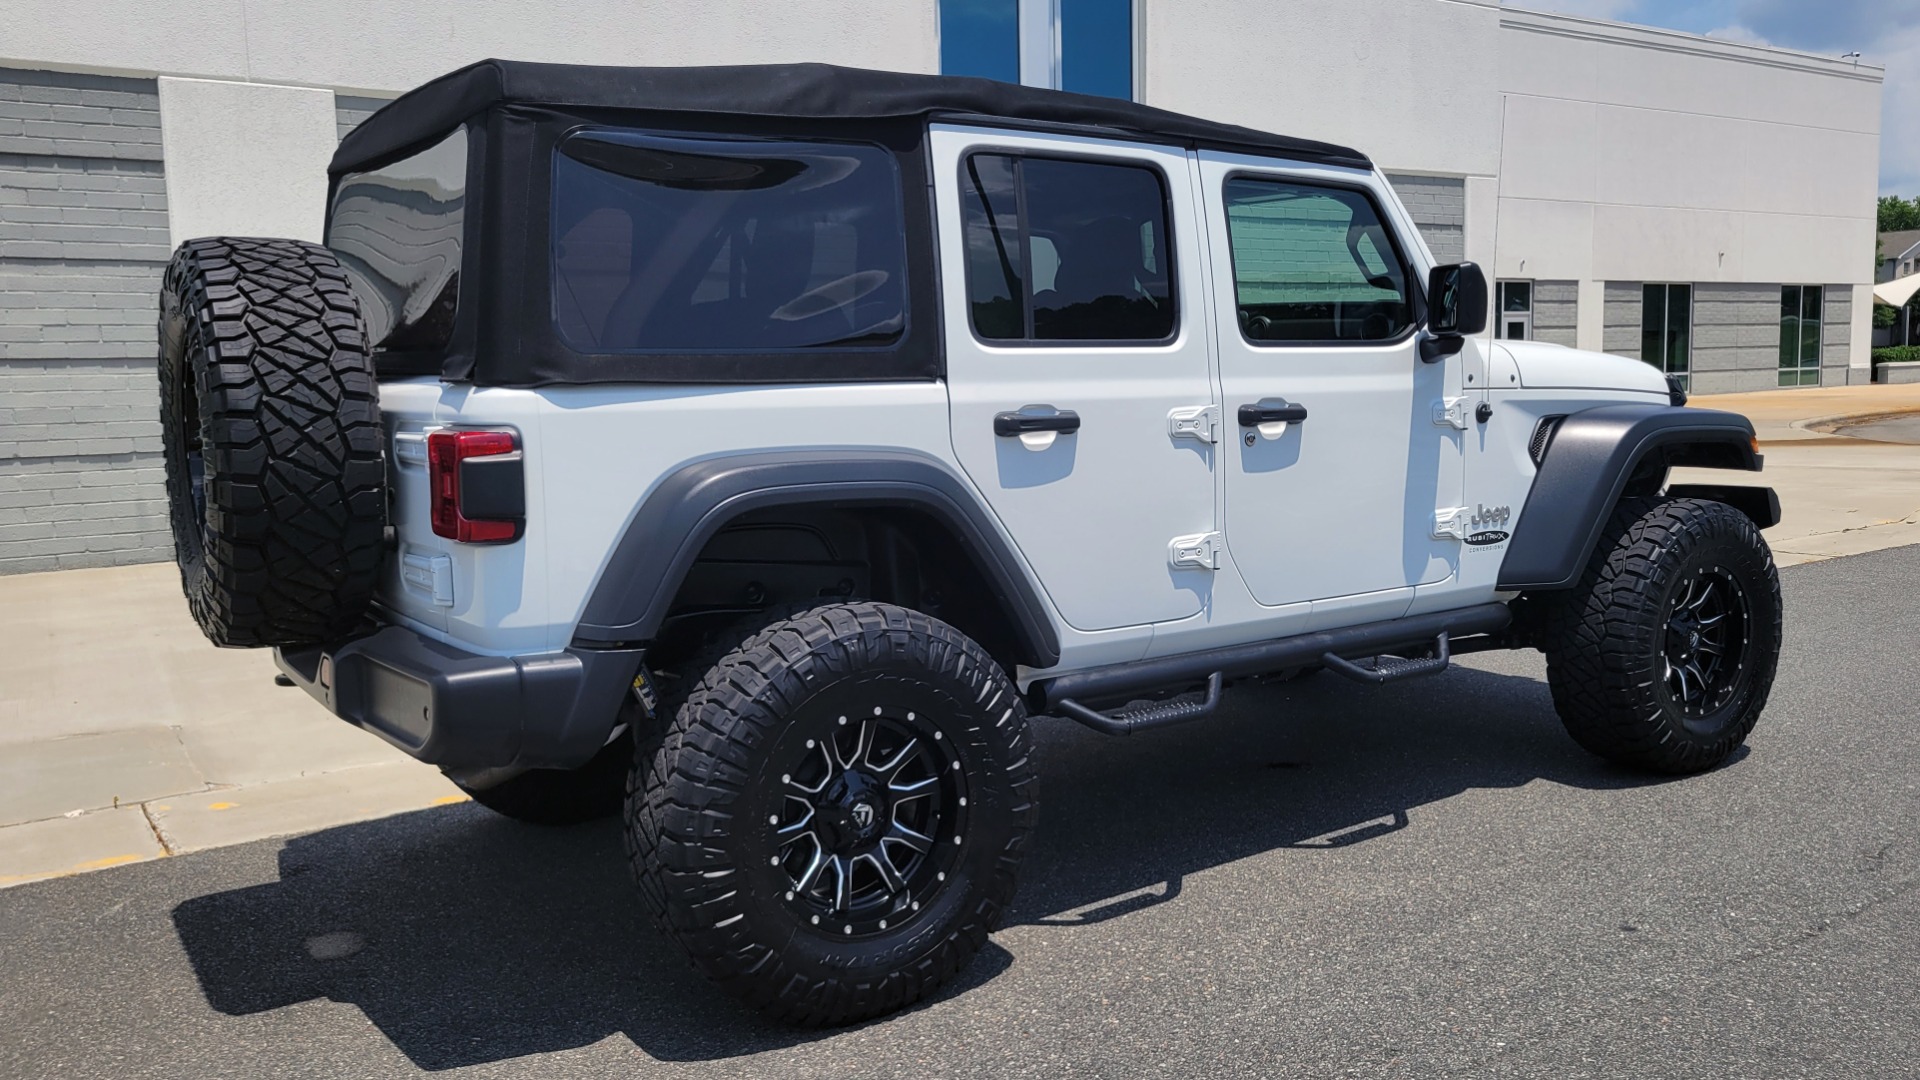 Used 2018 Jeep WRANGLER UNLIMITED SPORT RUBITRUX 4X4 / AUTO / CLOTH SEATS / SOFT-TOP / CAMERA for sale $46,500 at Formula Imports in Charlotte NC 28227 6